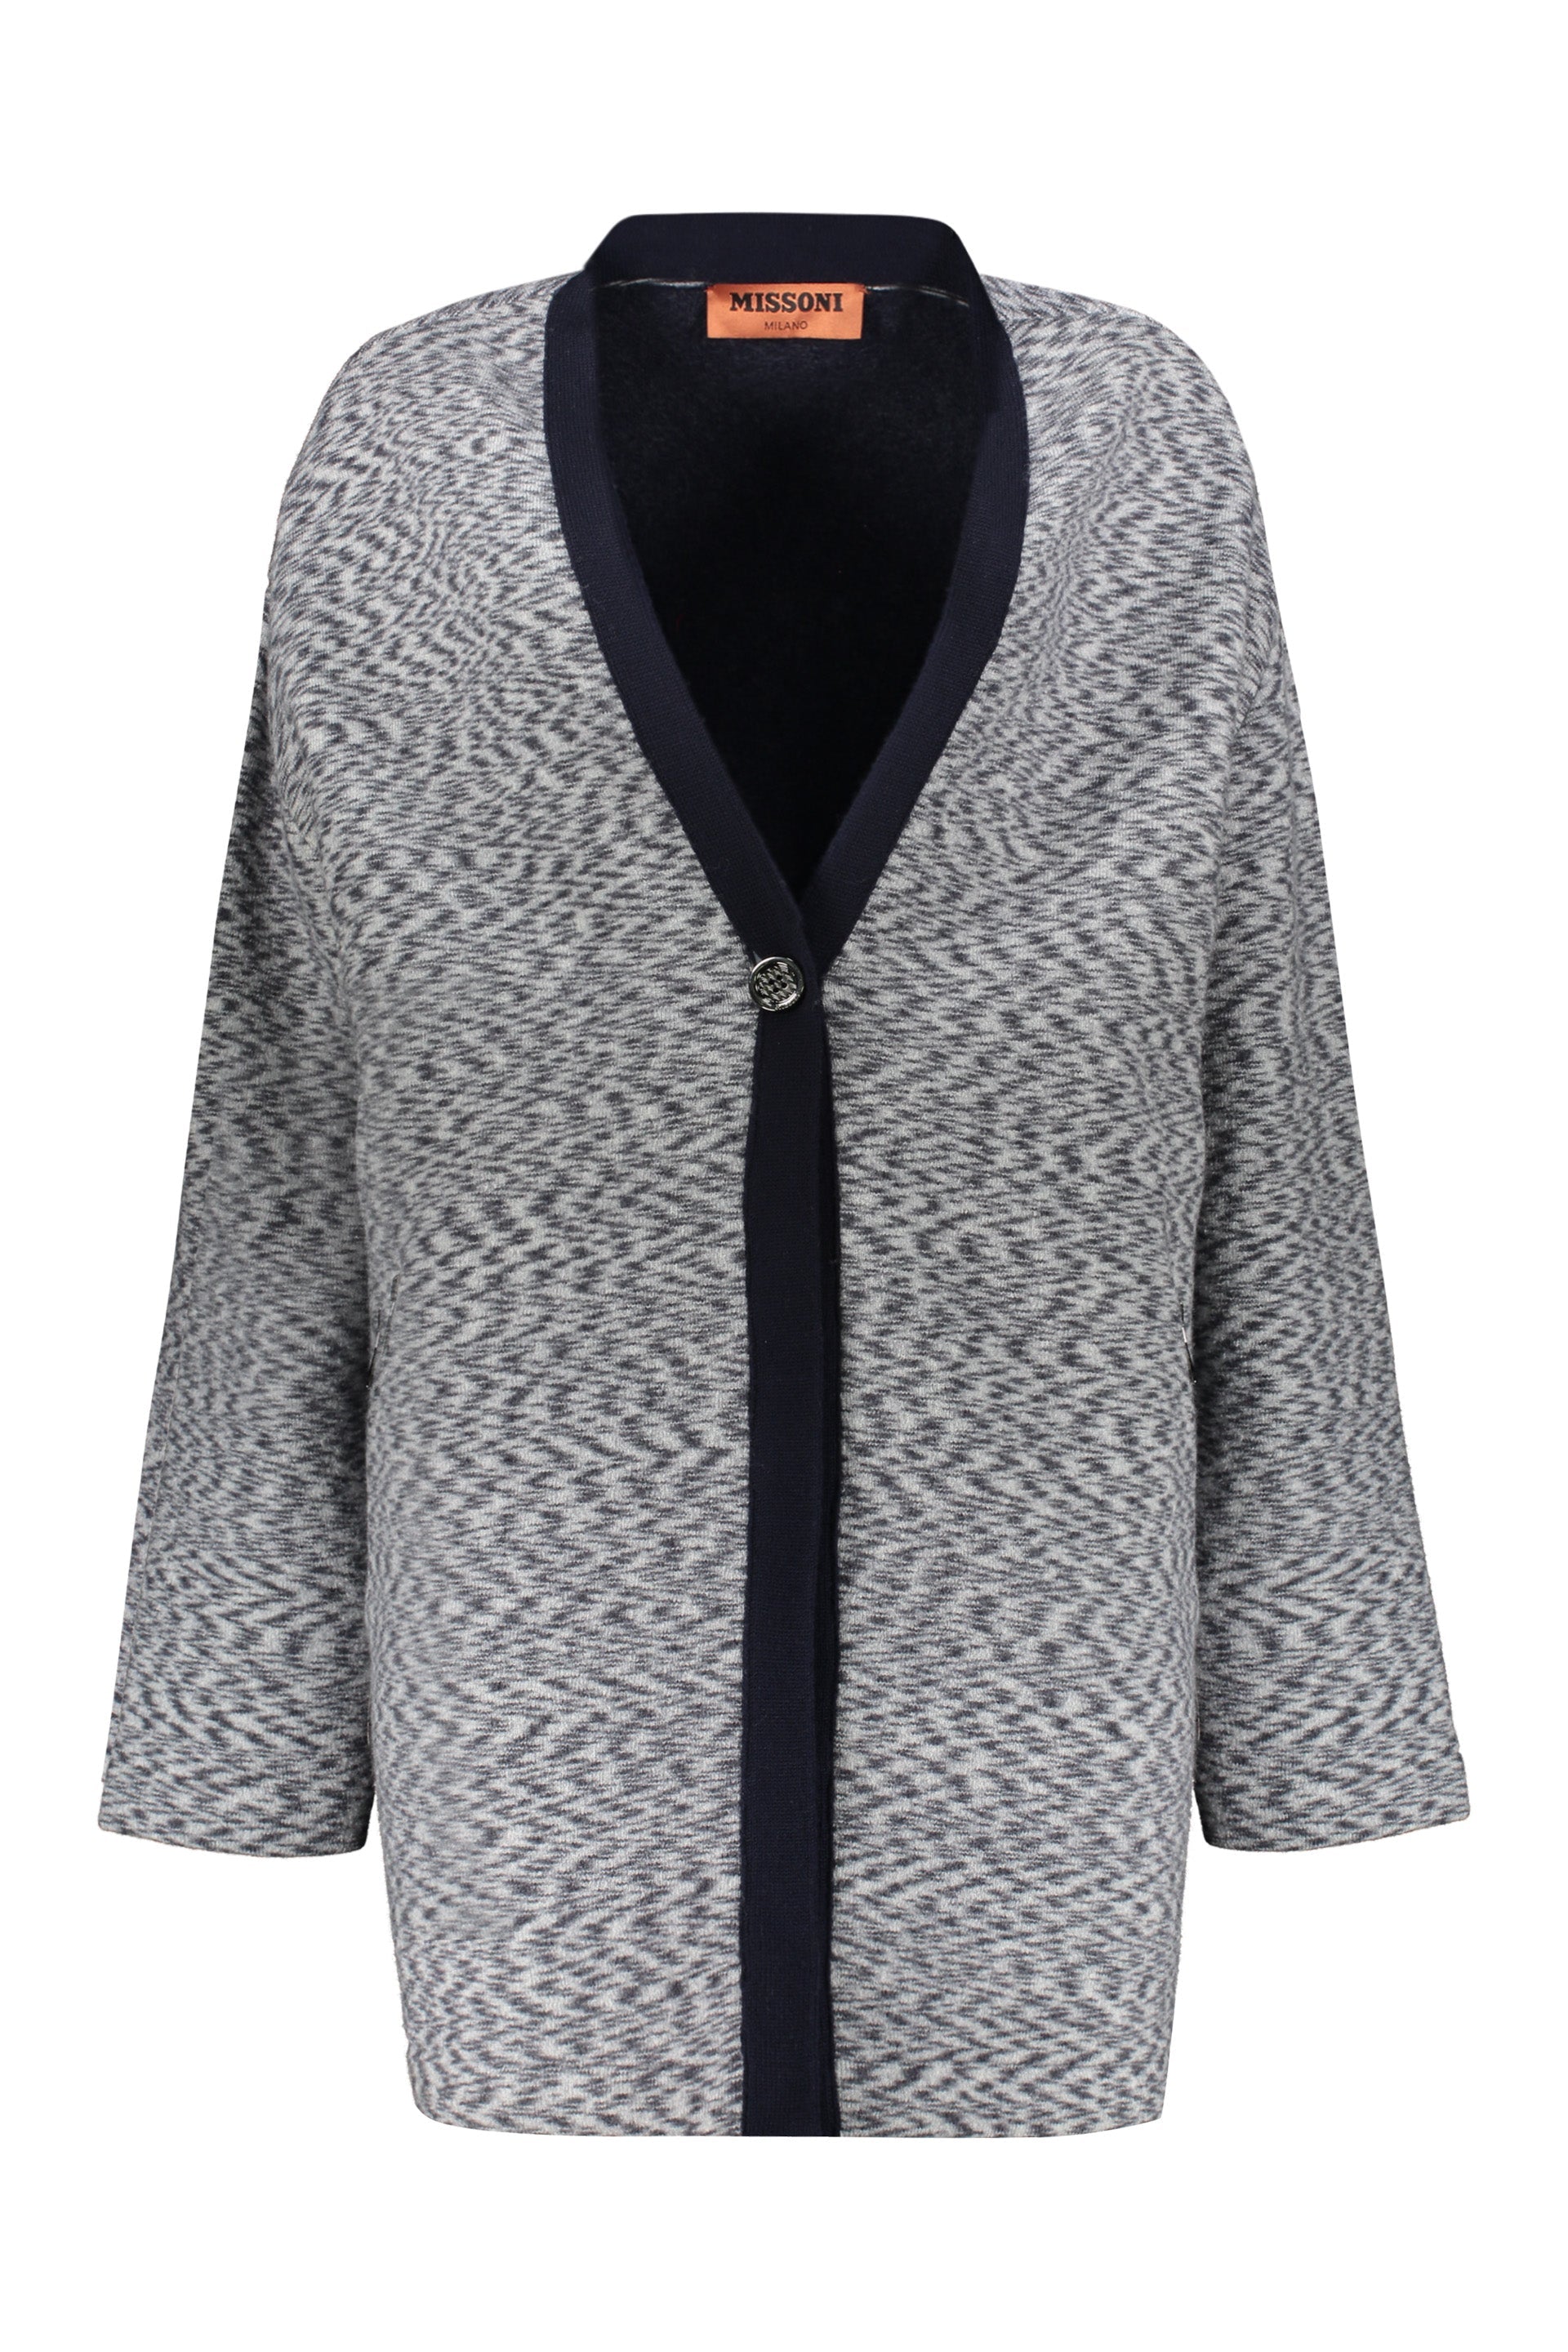 Missoni-OUTLET-SALE-Wool-blend-cardigan-Strick-S-ARCHIVE-COLLECTION.jpg